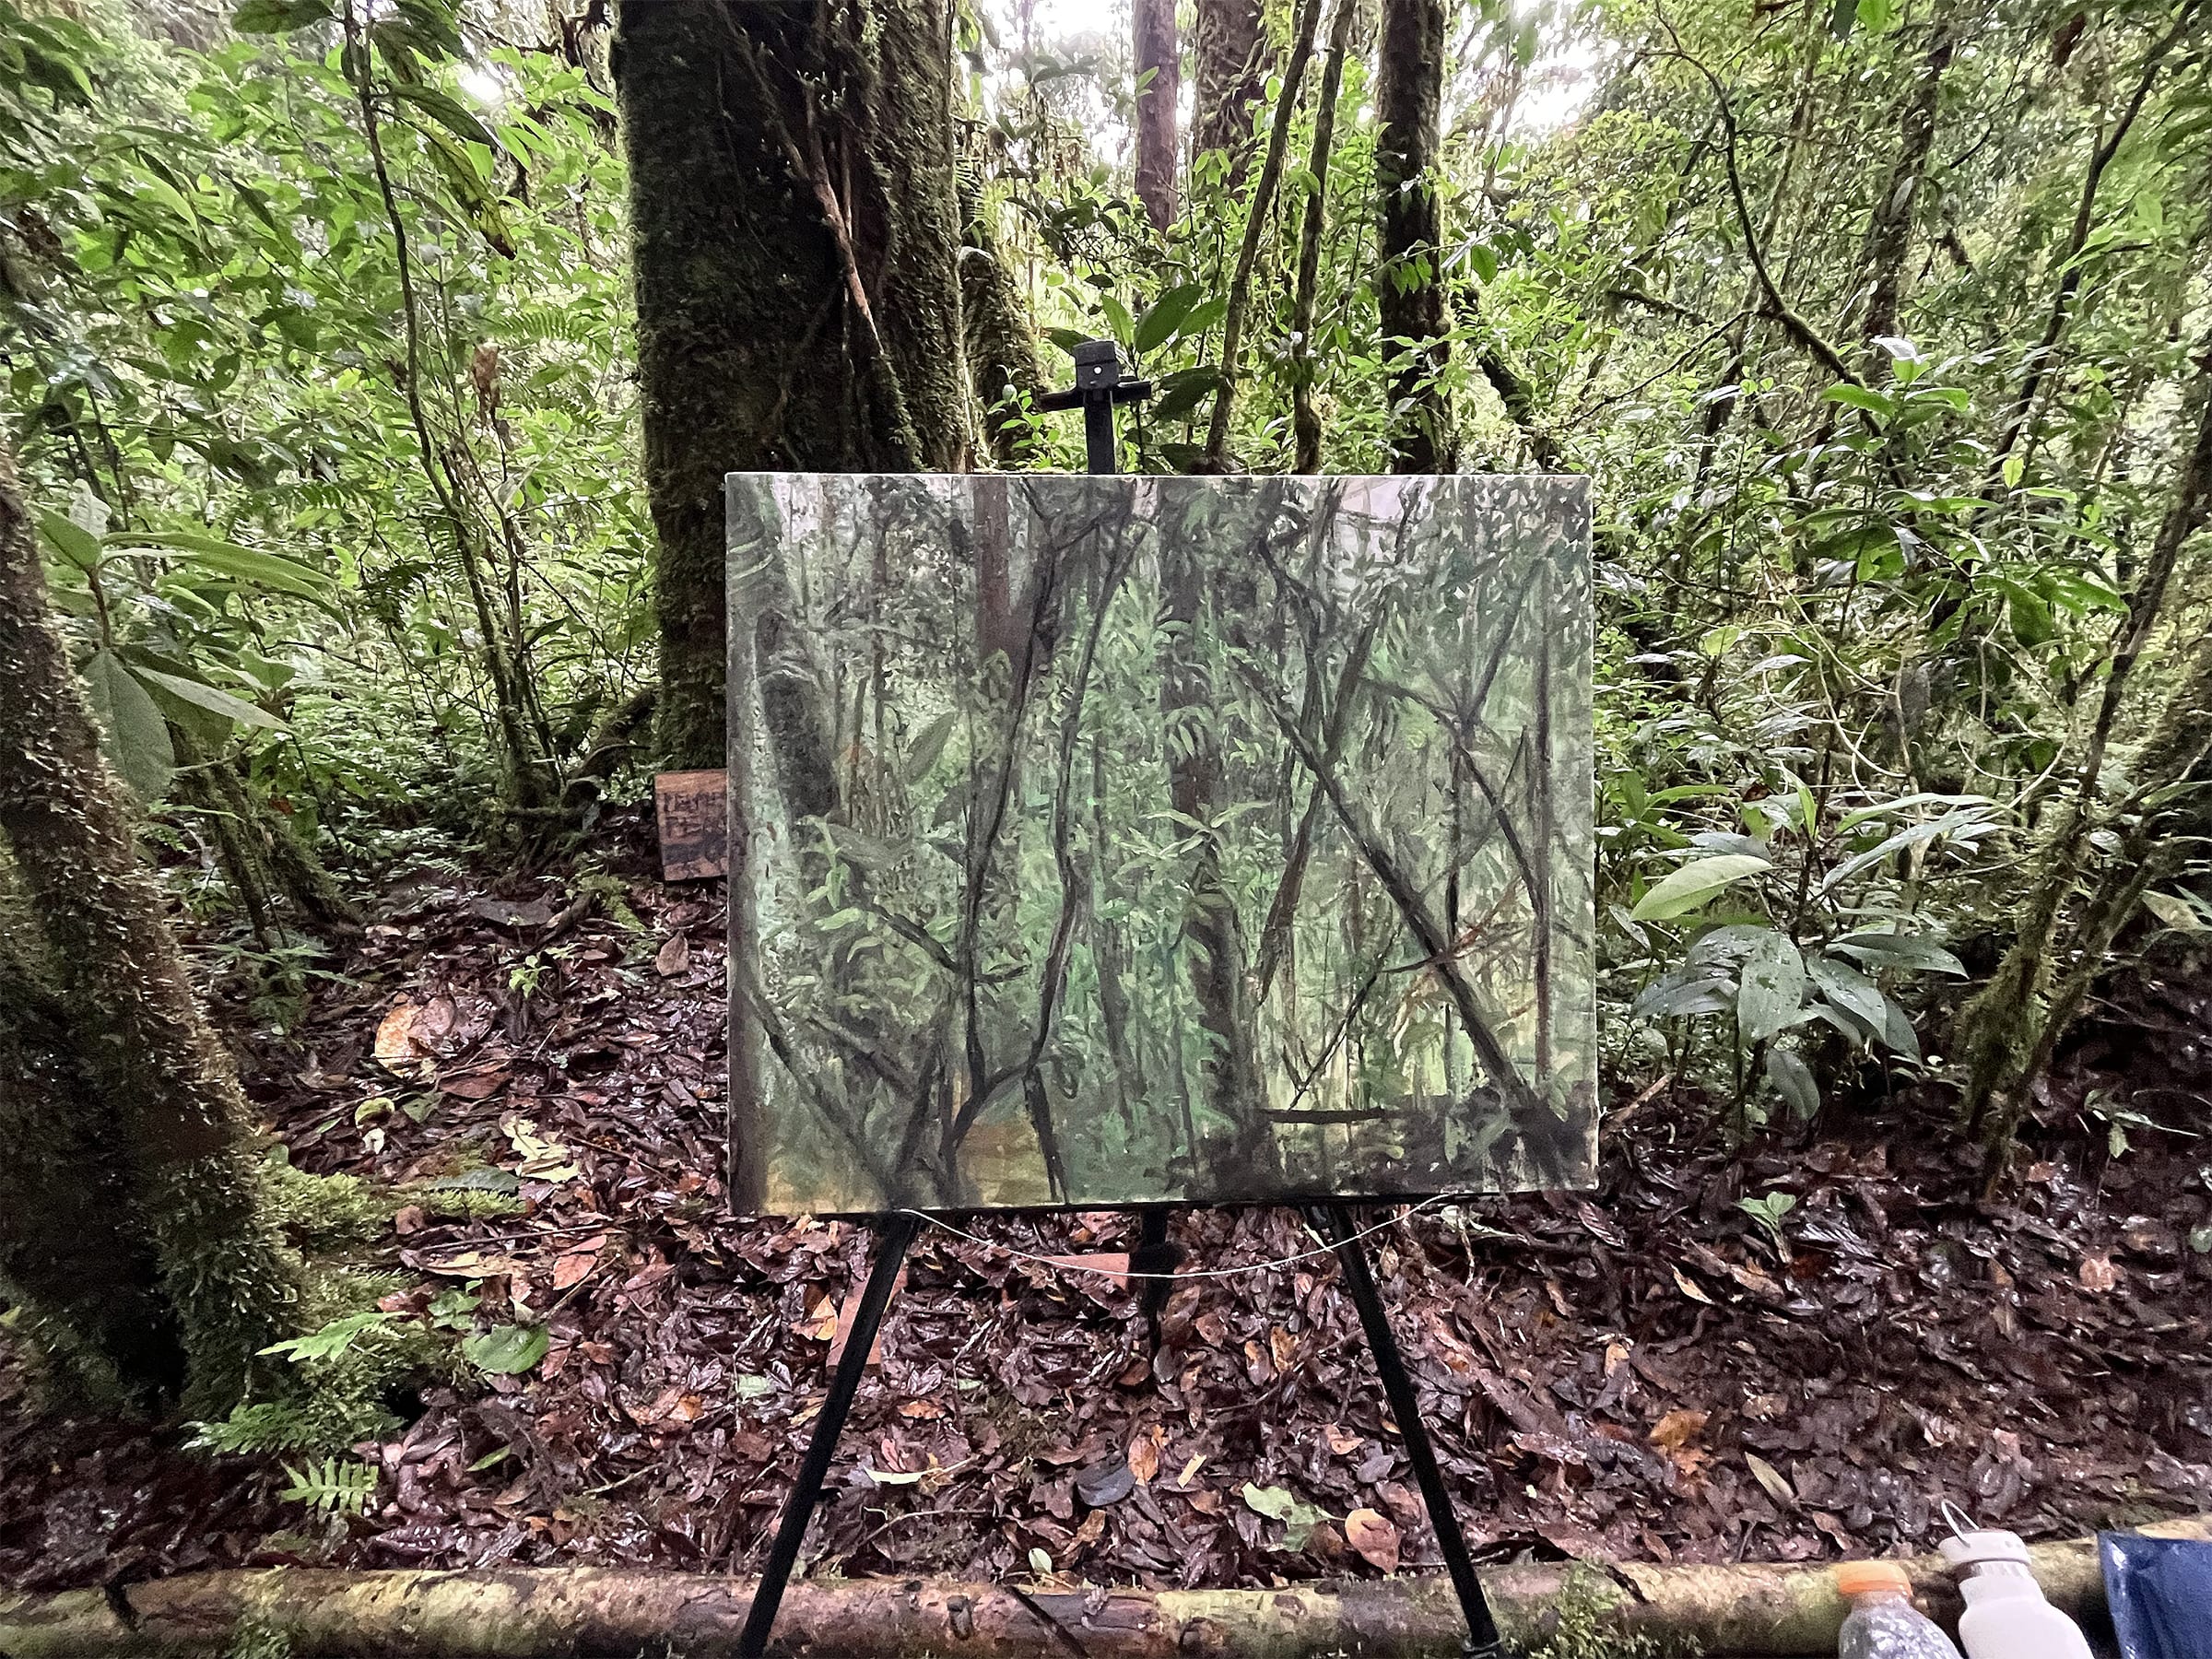 Outdoors, painting a work that was exhibited at The Journal Gallery in 2022/23. Photo courtesy the artist.